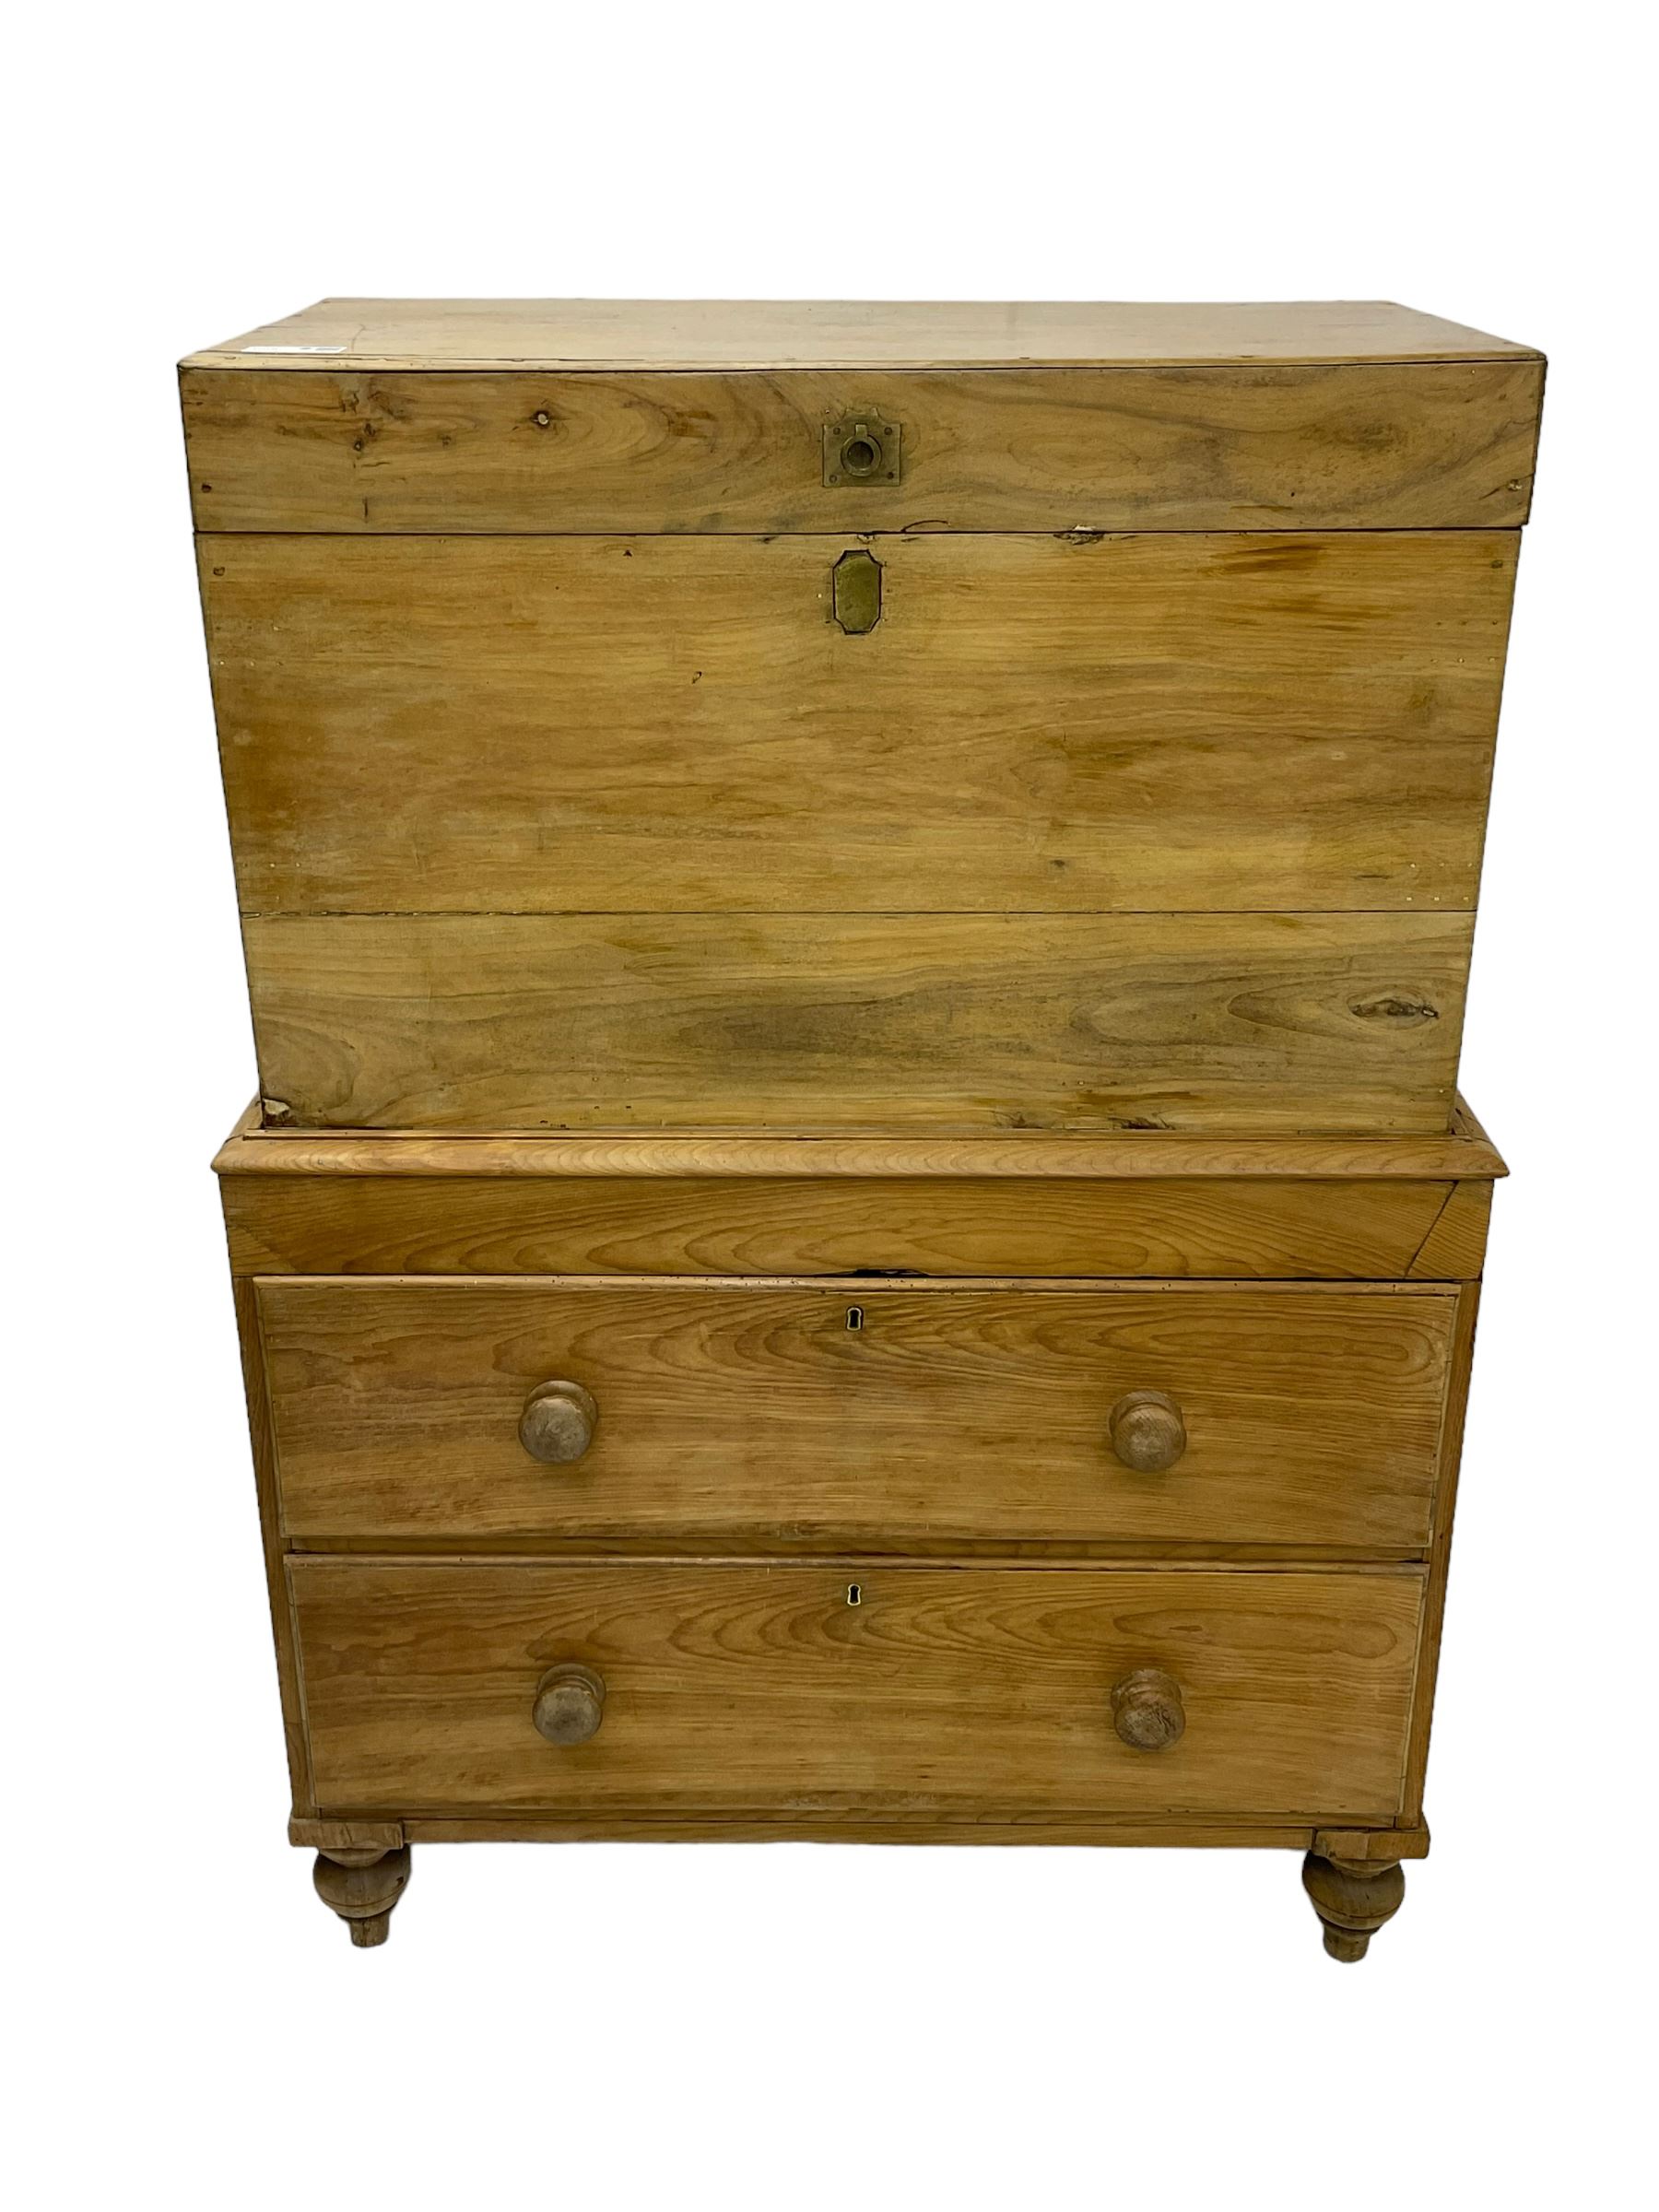 19th century camphor wood and pine chest on chest - Image 4 of 8